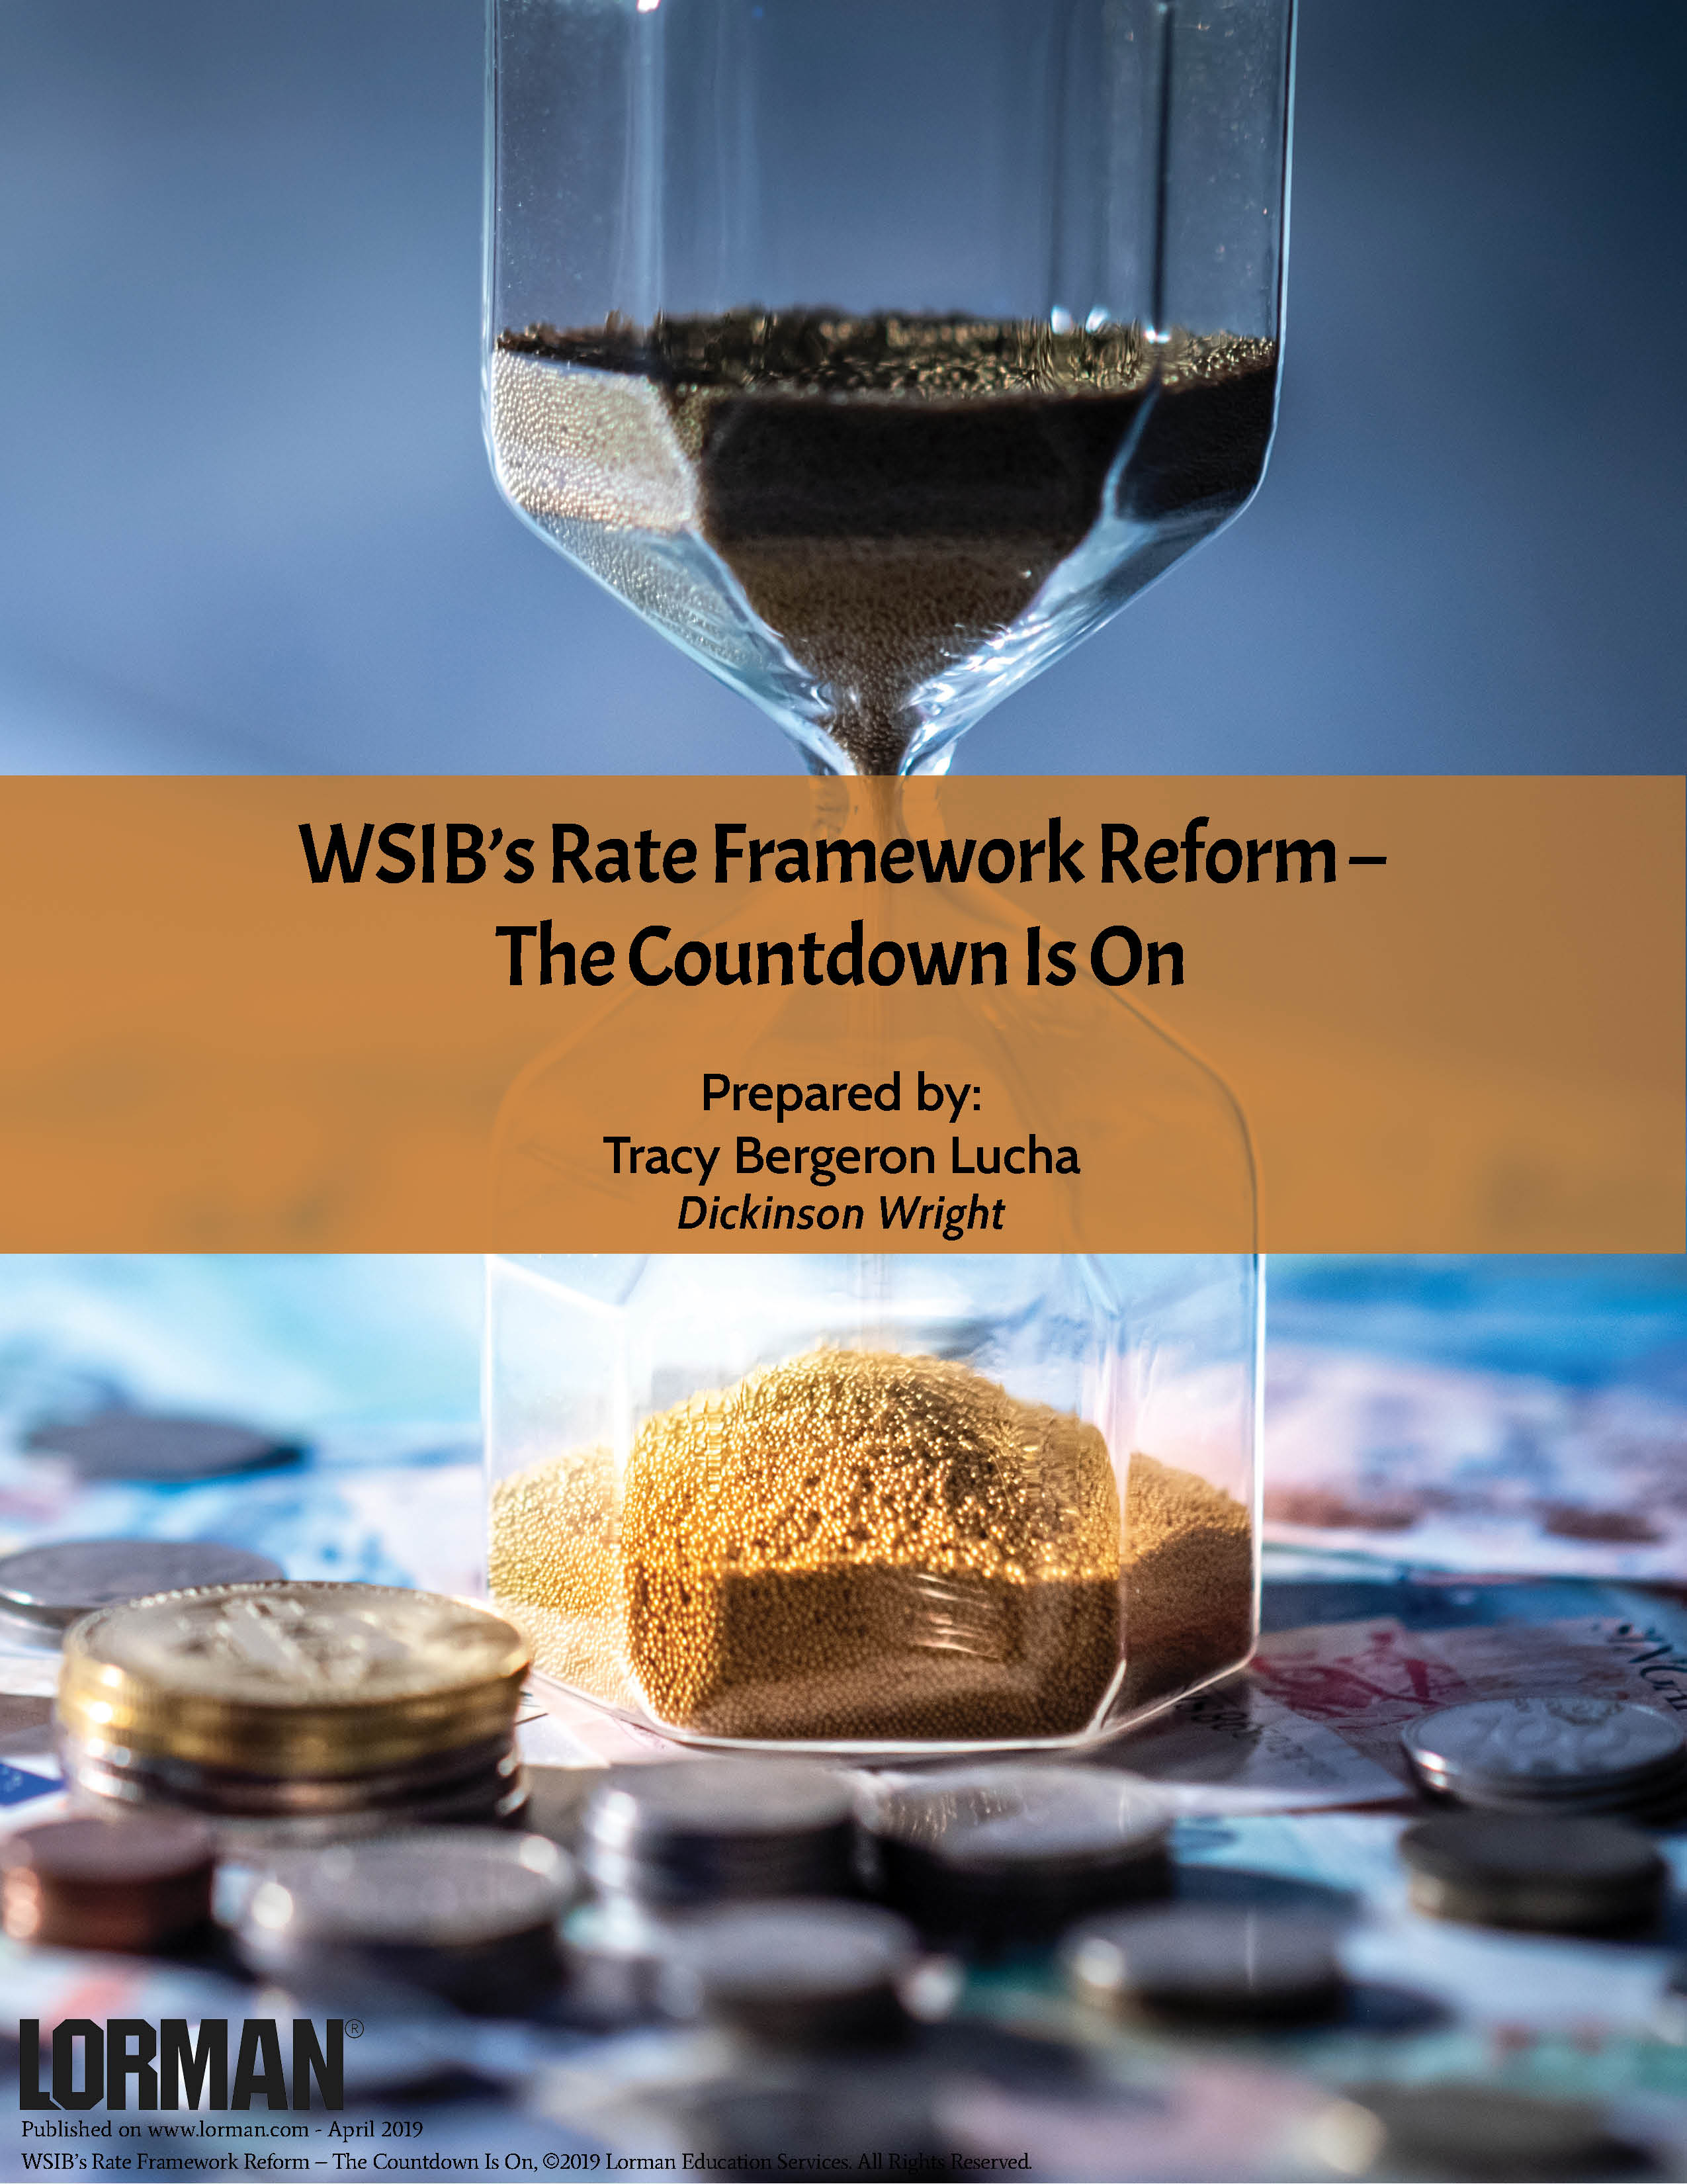 WSIB’s Rate Framework Reform – The Countdown Is On